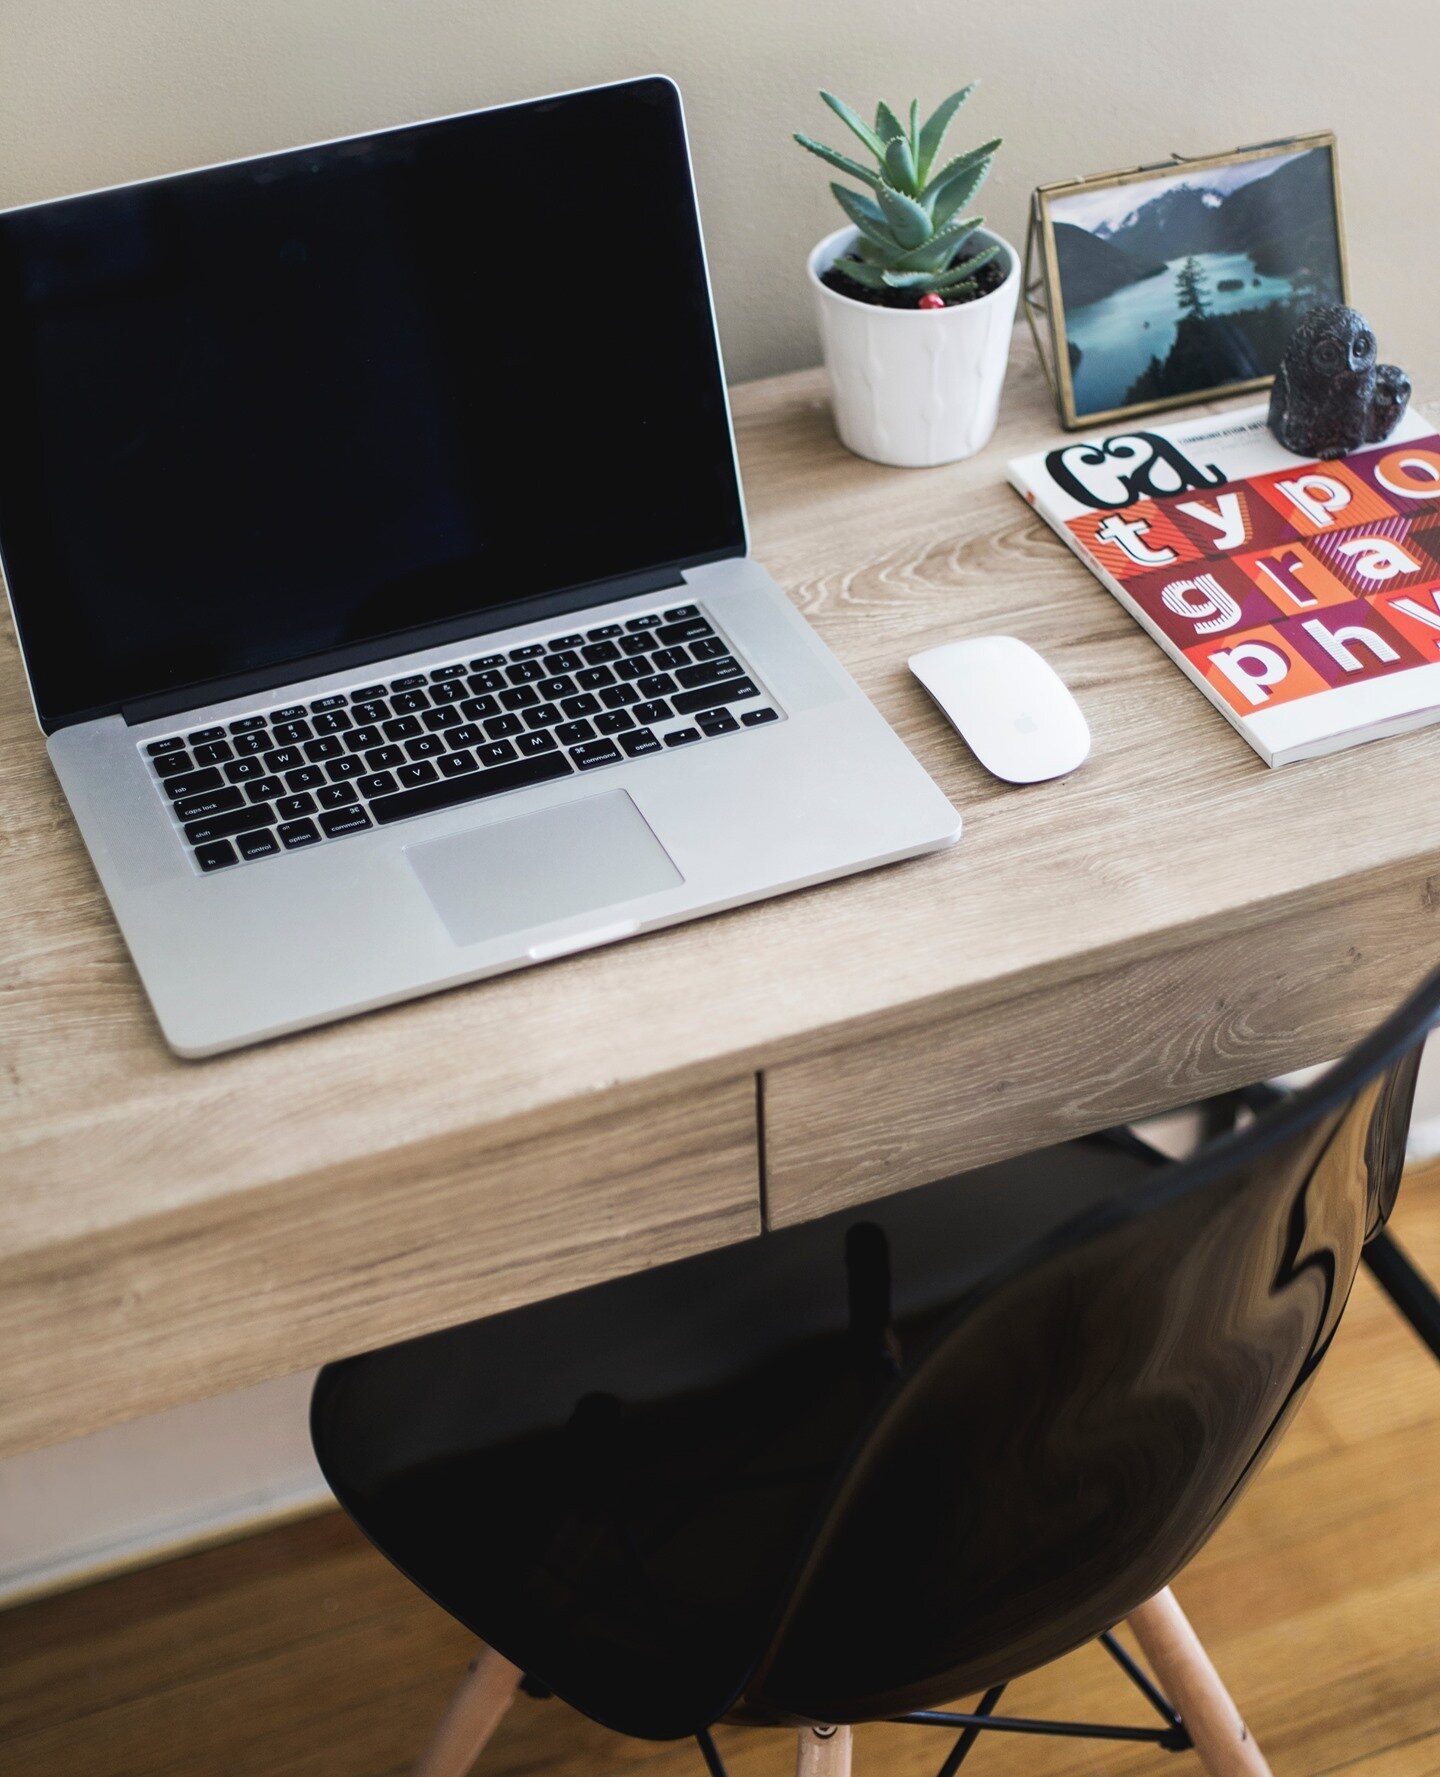 Home stretch guys - the end of Friday is almost here 😜 Why not use the weekend to spruce up your Home Office to motivate you to hit the ground running on Monday?  By popular demand, here are some tips for your weekend project:⁠
⁠
📂 Declutter &amp; 